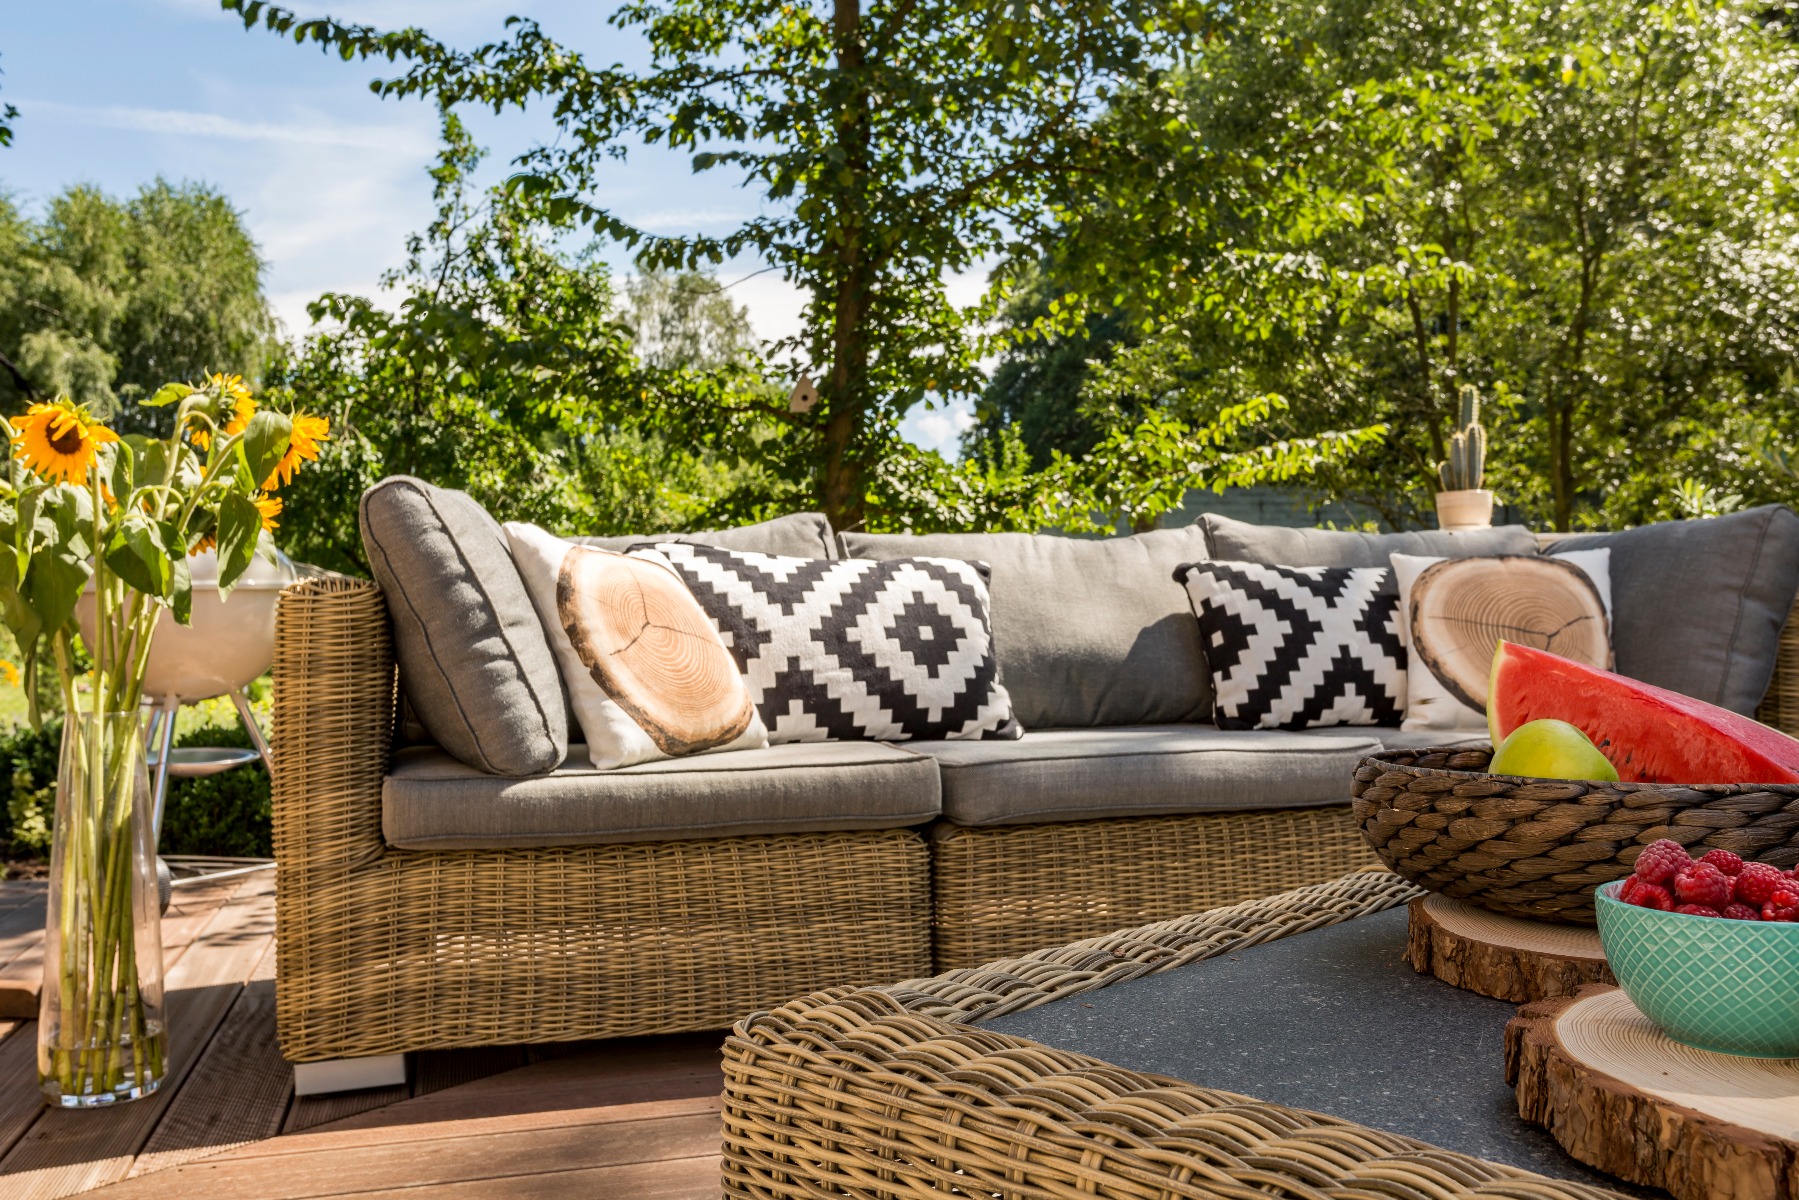 Protect patio cushions, outdoor art, and curtains from the elements.